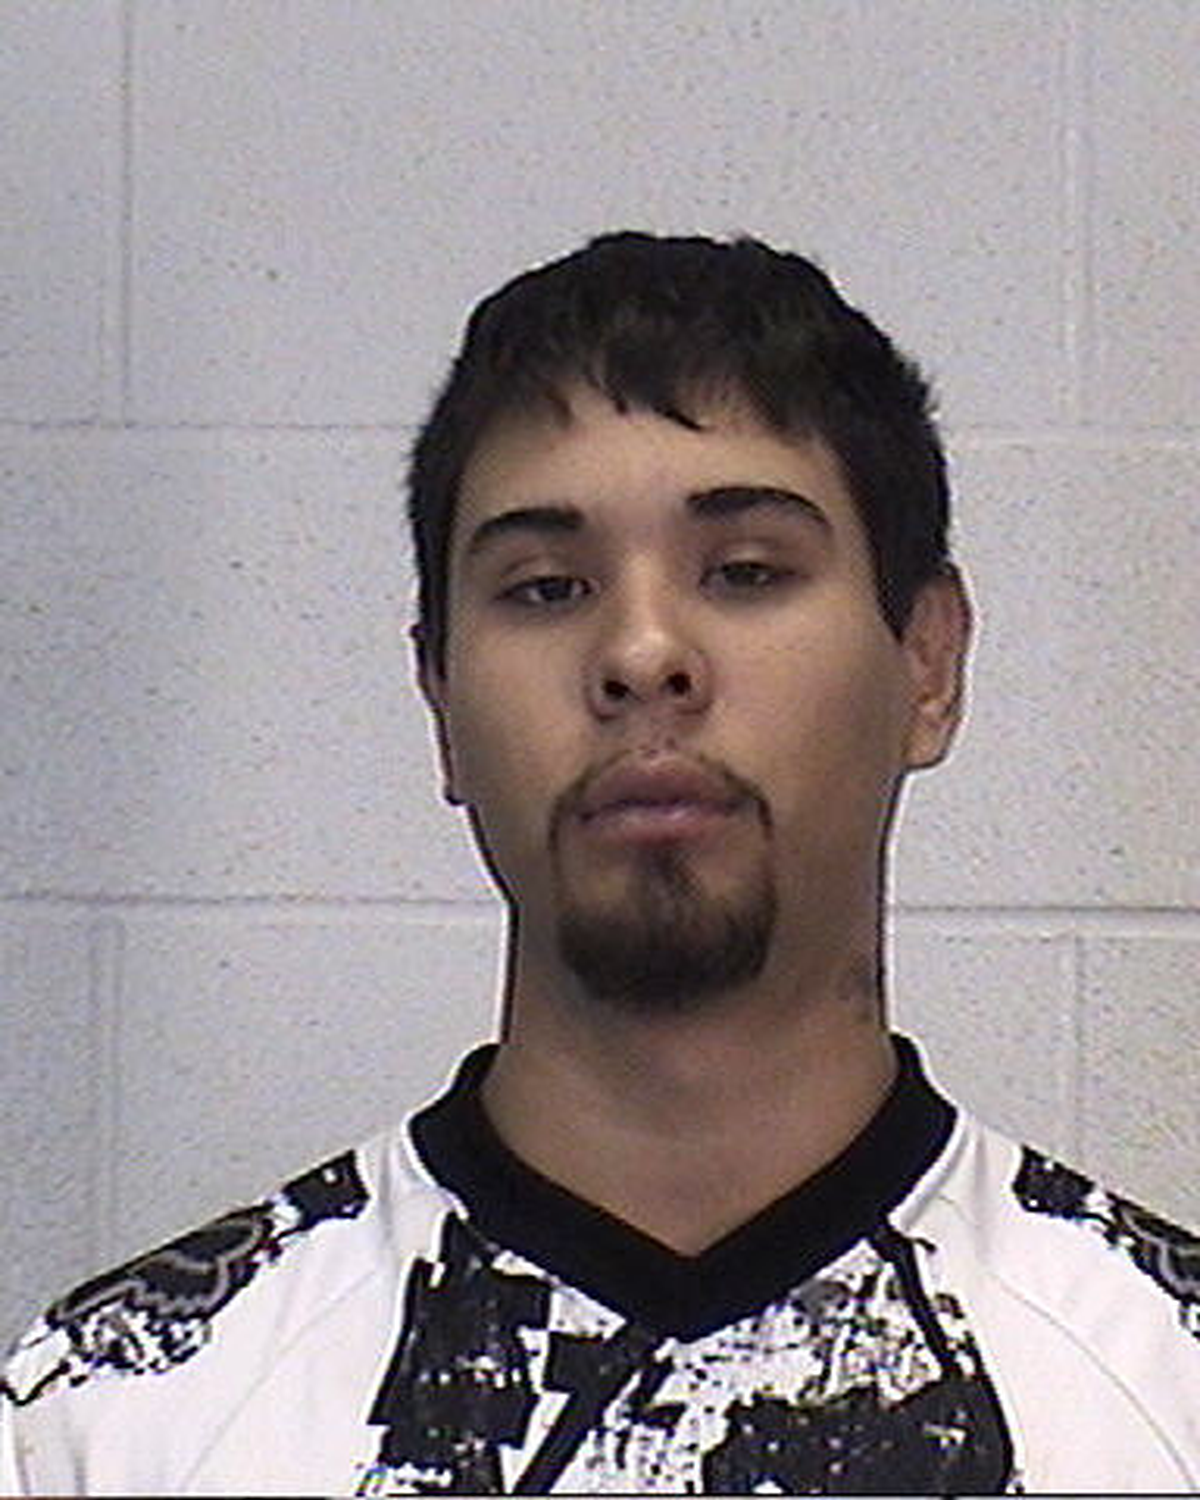 Frankie Mahto Larioz, 19, of Moses Lake, was arrested Friday, June 26, 2009, in the murder of Juan Manuel Vasquez Jr. (Courtesy of Grant County Sheriff